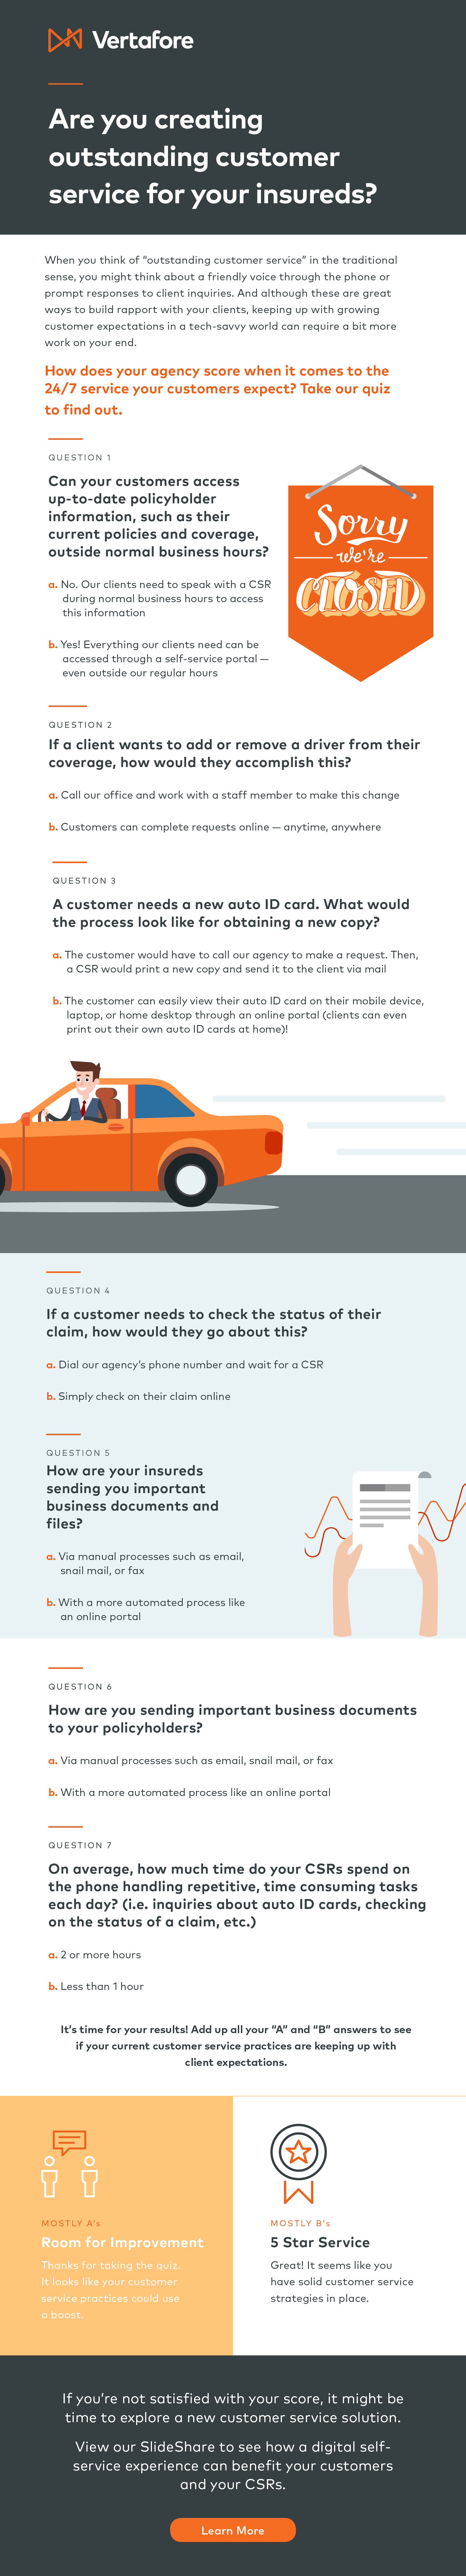 Are you creating outstanding customer service for your insureds? Infographic